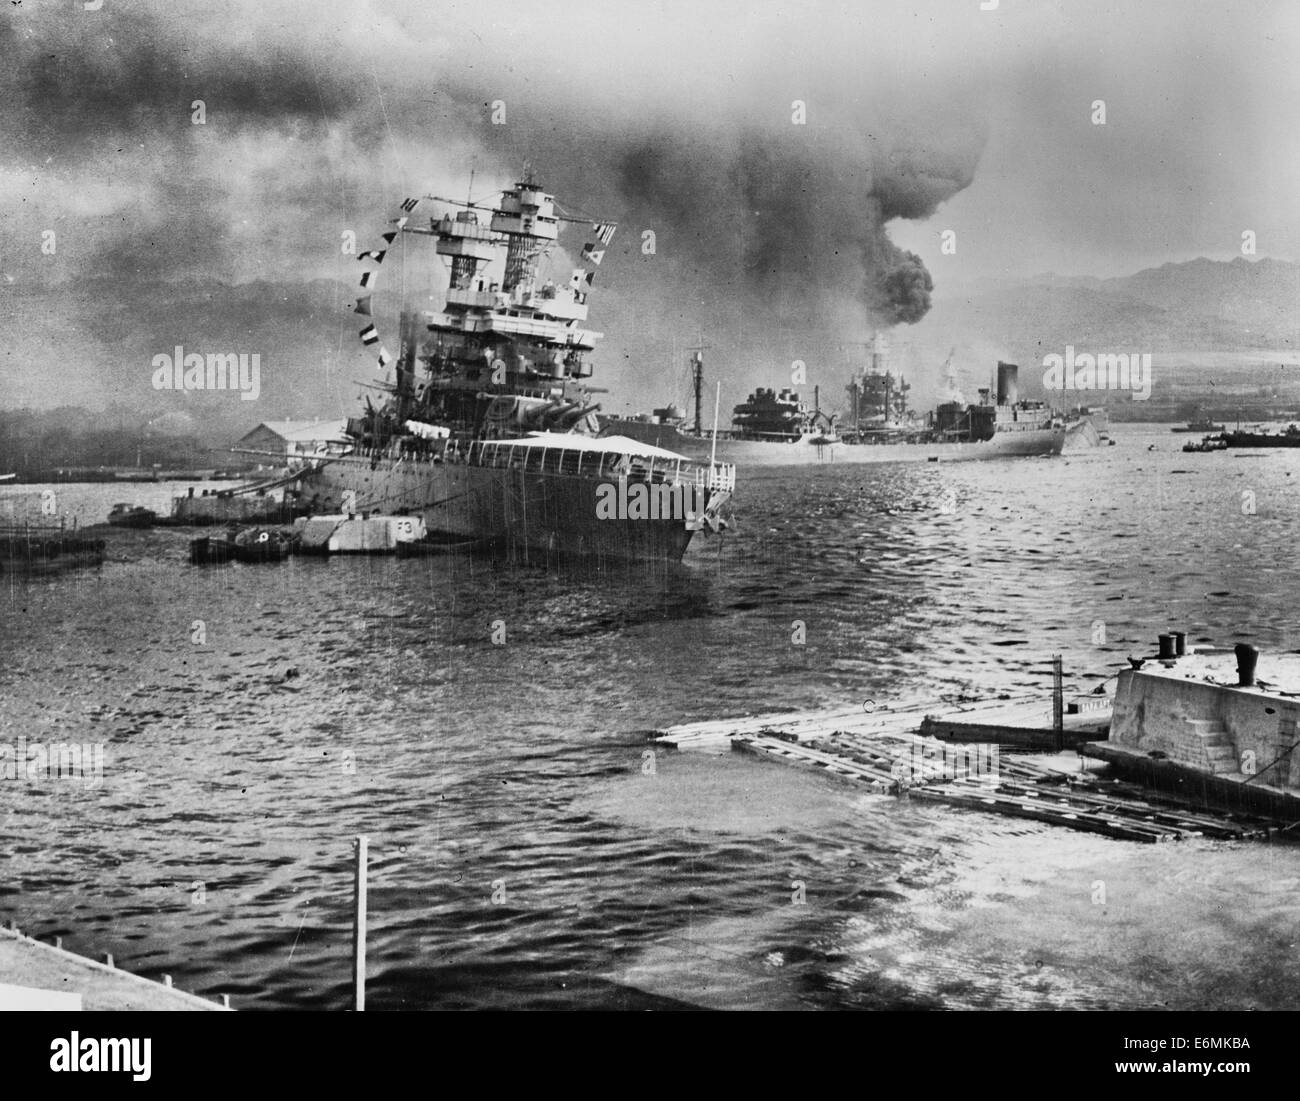 Leaves berth virtually surrounded by stricken ships. The U.S.S. Neosho, navy oil tanker, cautiously backs away from her berth (right center) in a successful effort to escape the Japanese attack on Pearl Harbor, Dec. 7, 1941. At left the battleship U.S.S. California lists after aerial blows. Other crippled warships and part of the hull of the capsized U.S.S. Oklahoma may be seen in the background. The Neosho was later sunk in the Coral Sea Stock Photo